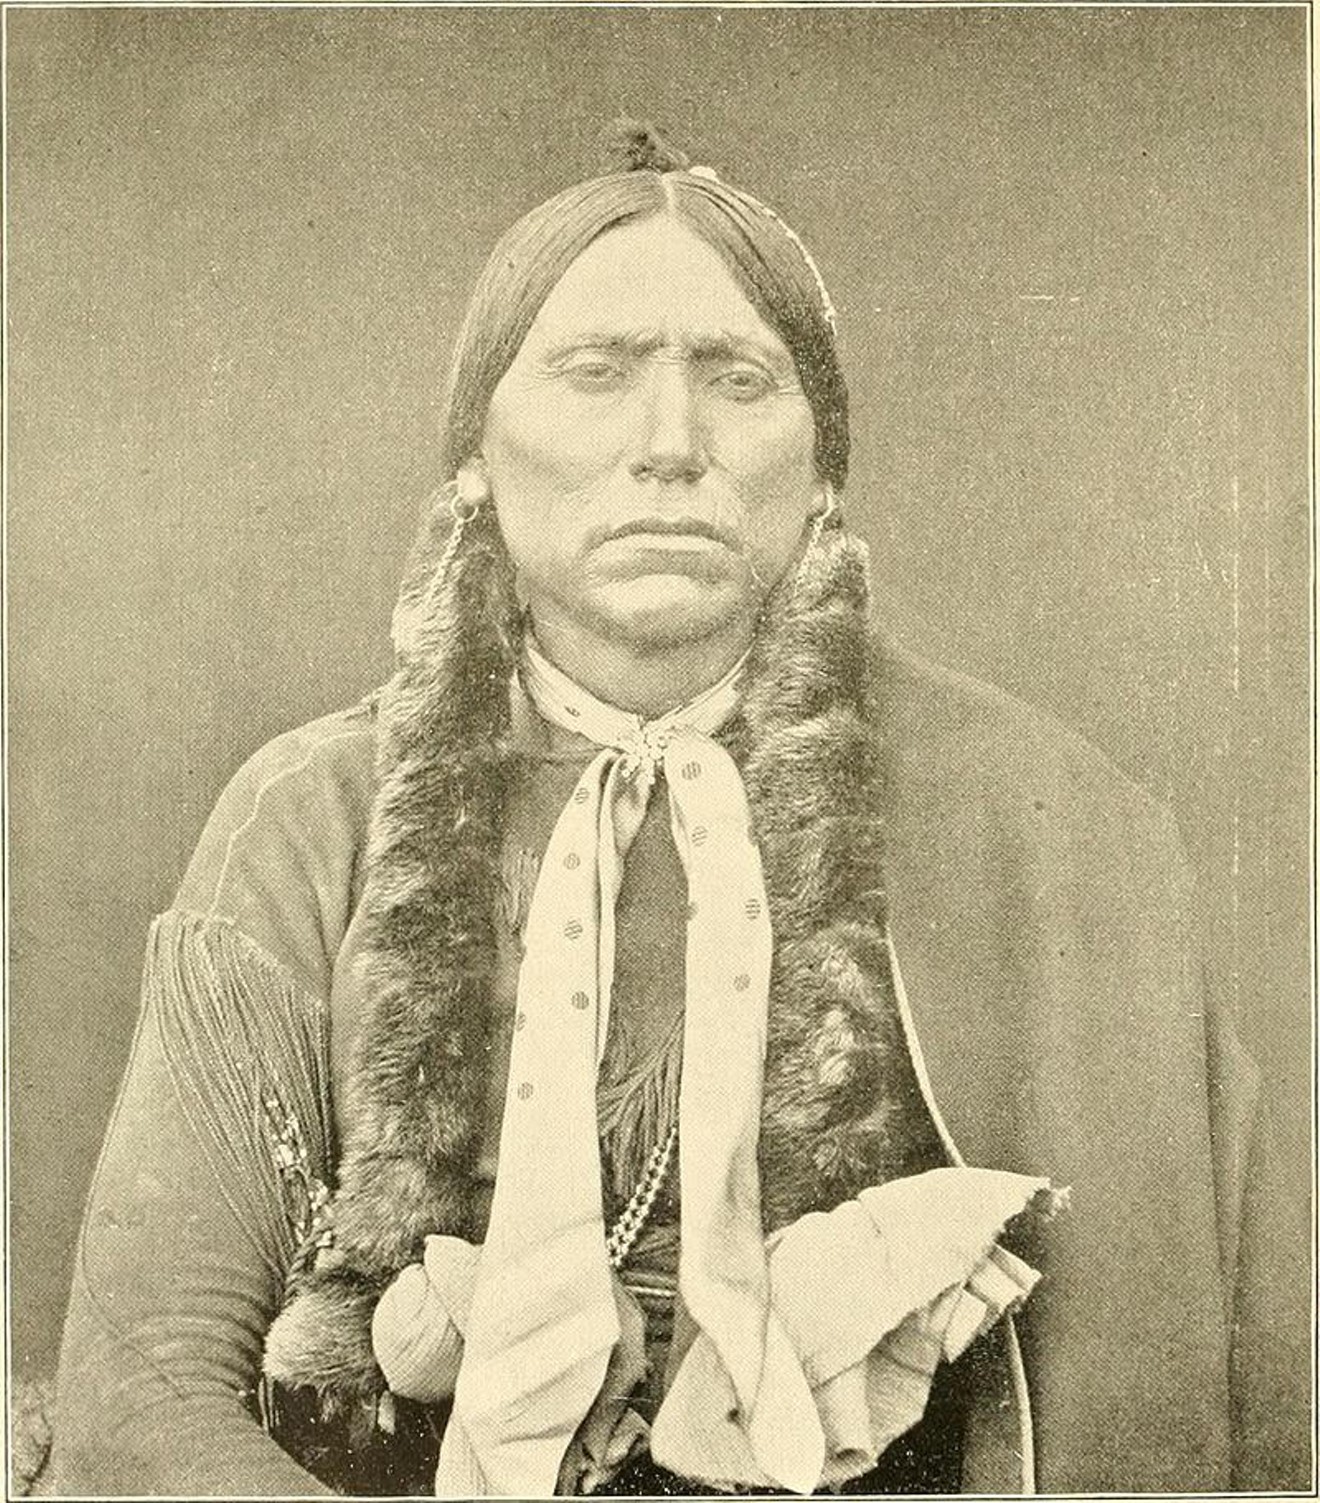 Quanah Parker was the last chief of a branch of the Comanche tribe in Texas. The state just passed a bill to commemorate his legacy.